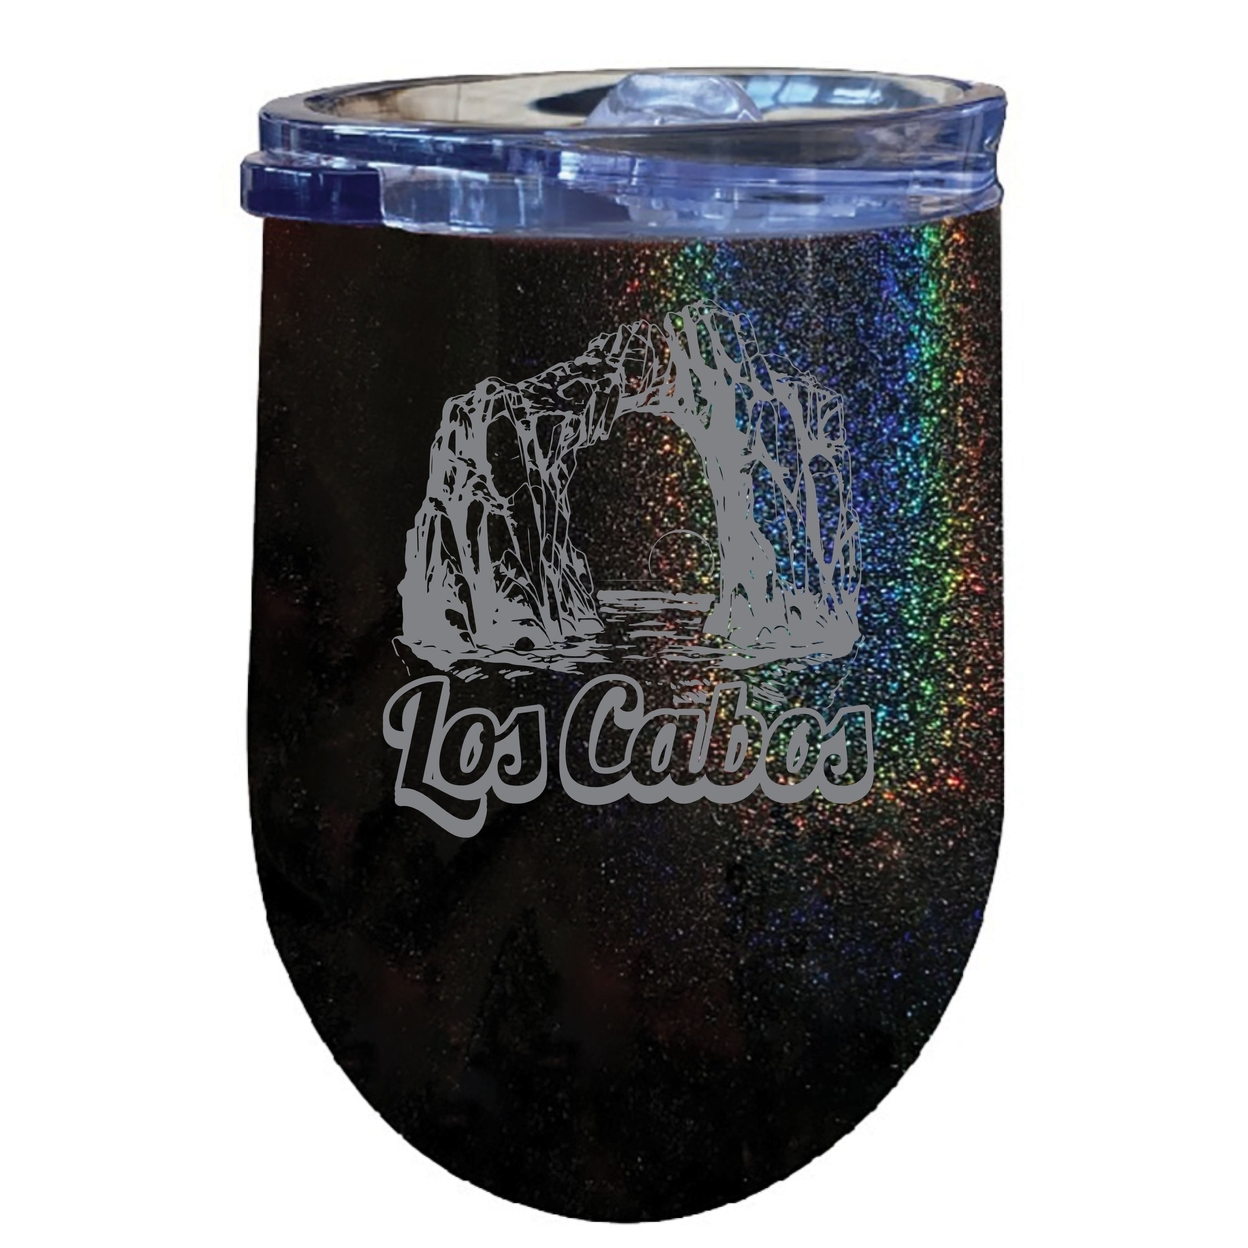 Los Cabos Mexico Souvenir 12 Oz Engraved Insulated Wine Stainless Steel Tumbler - Rainbow Glitter Gray,,4-Pack